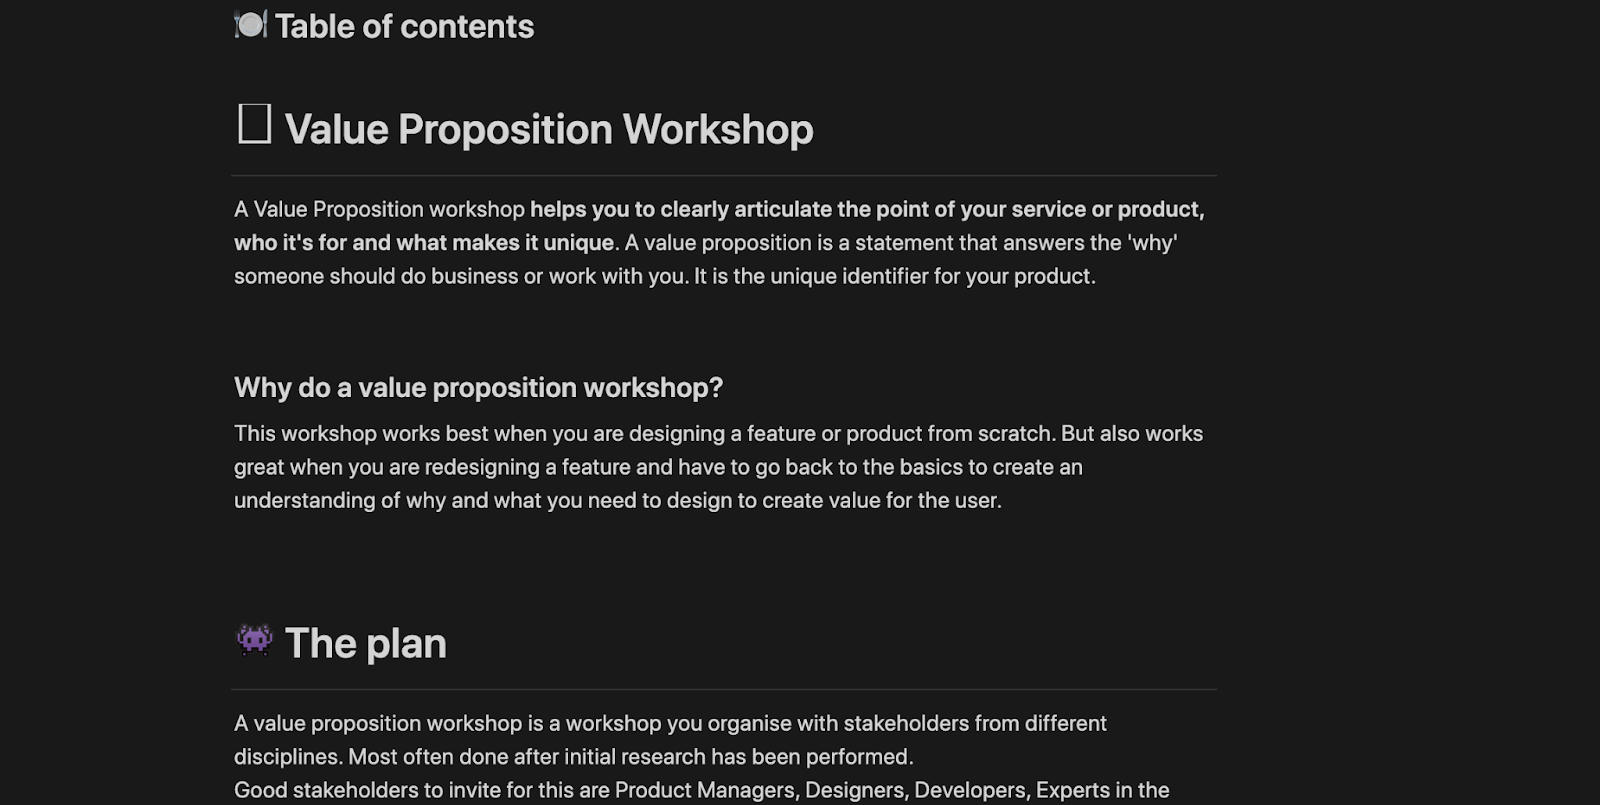 Notion’s value proposition workshop template walks you through the creation process step by step.